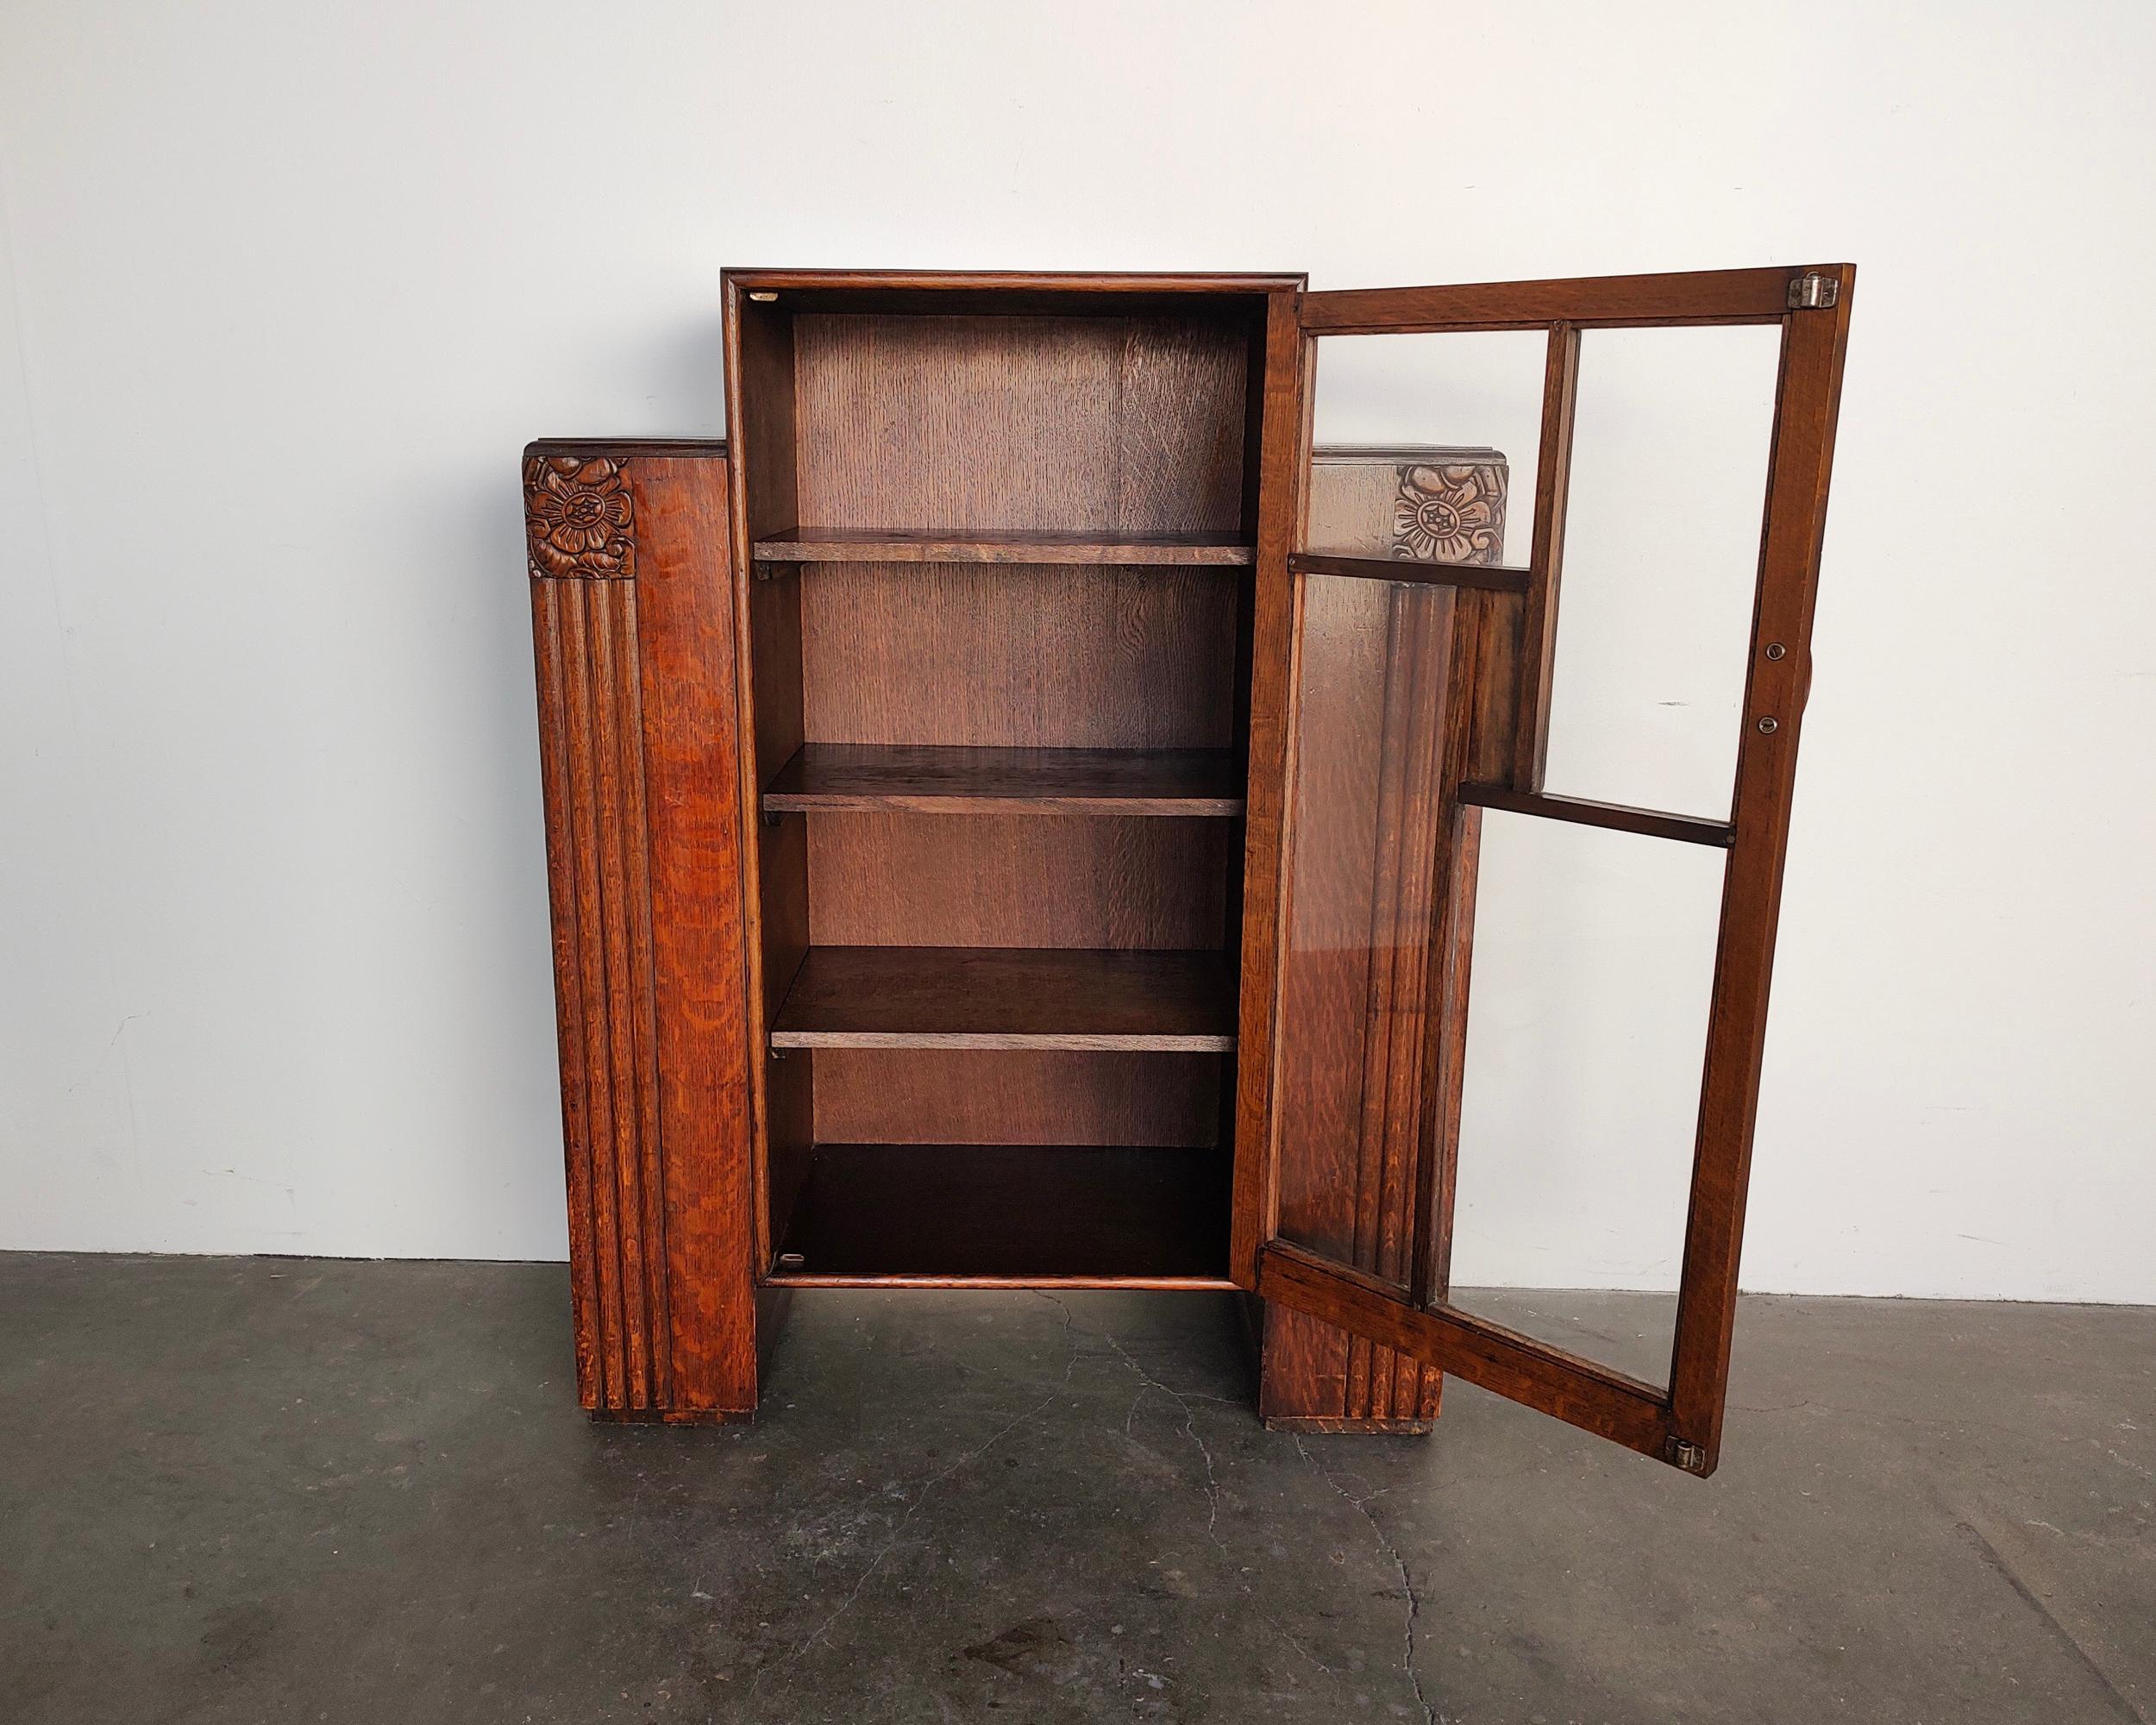 American Tiger Oak Art Deco Display Cabinet With Shelves by Herbert E. Gibbs 1930s